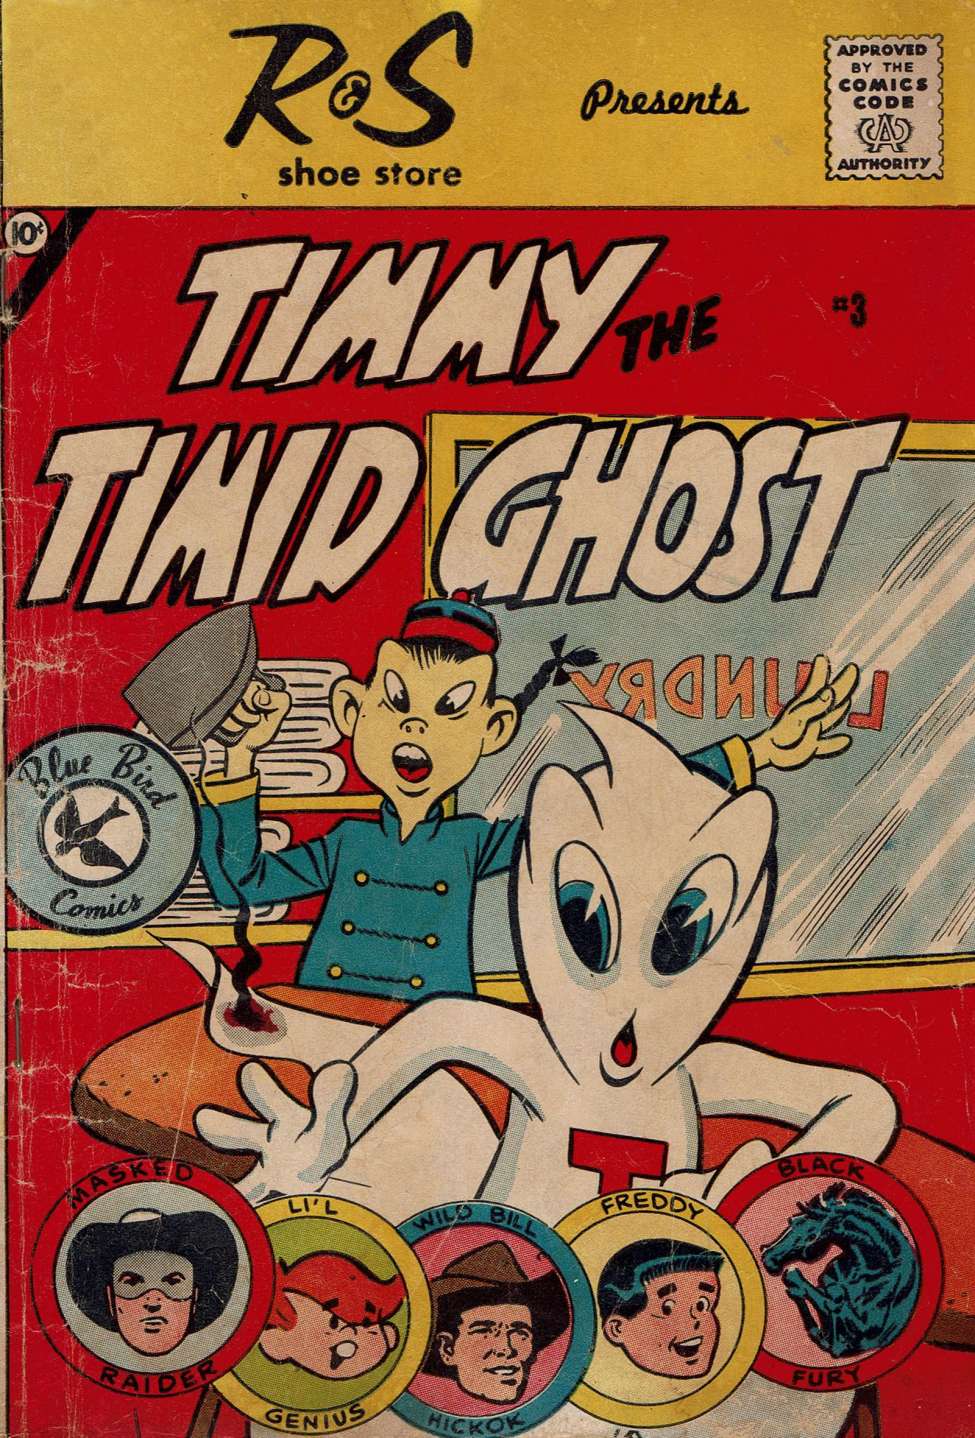 Book Cover For Timmy the Timid Ghost 3 (Blue Bird)